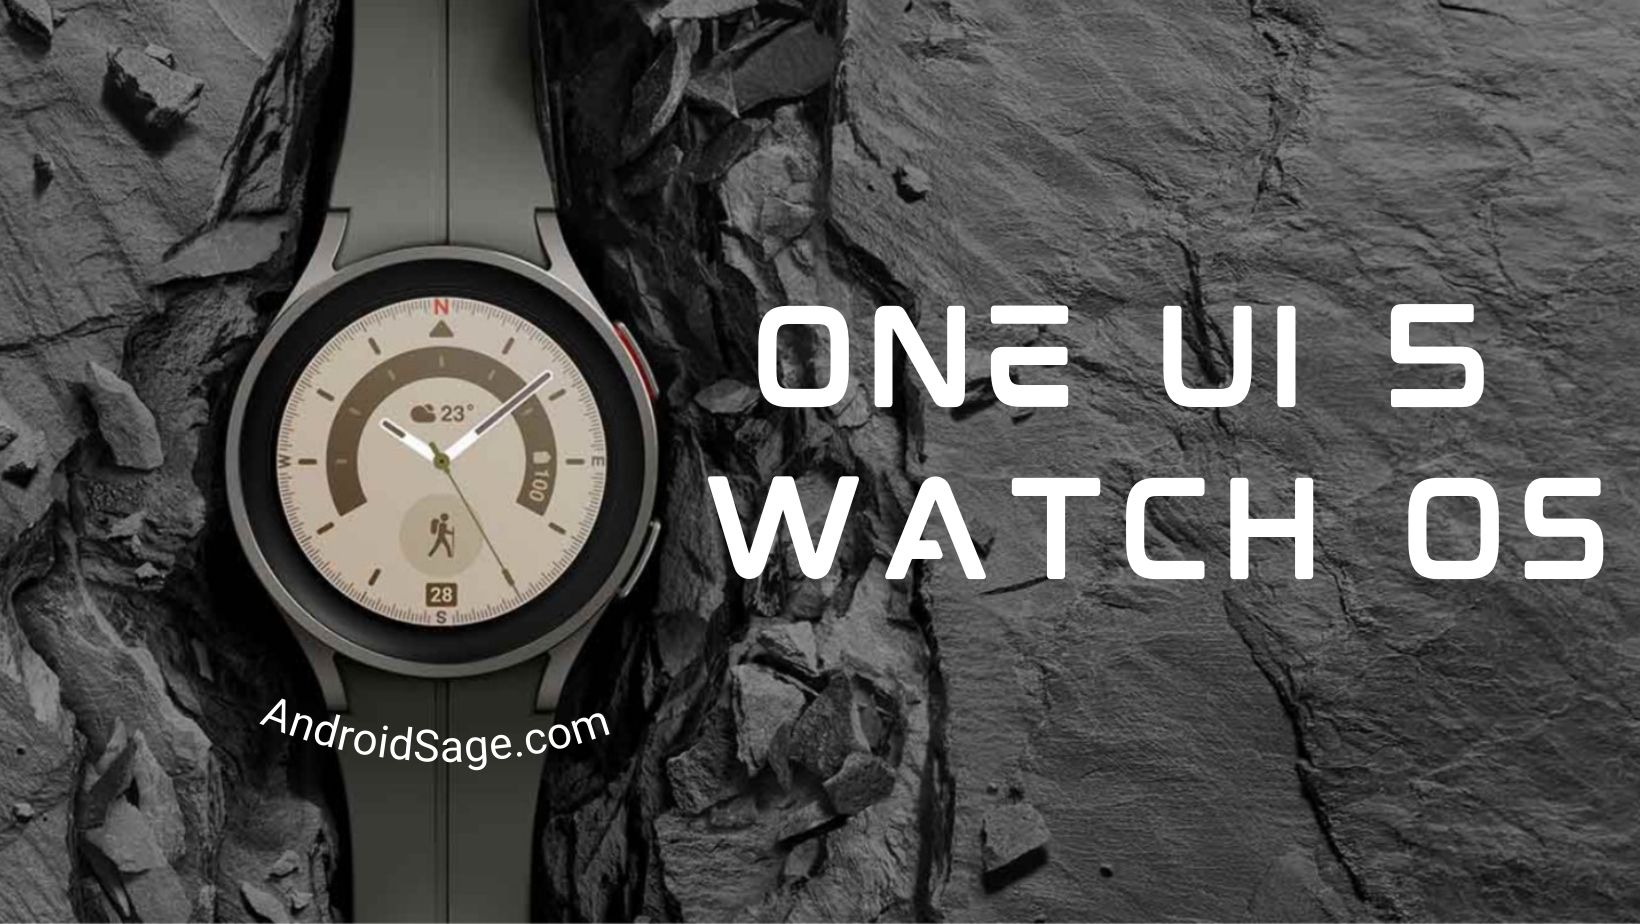 Download Stable One UI 5 Watch OS update for Samsung Galaxy Watch 4 and Watch 5 series